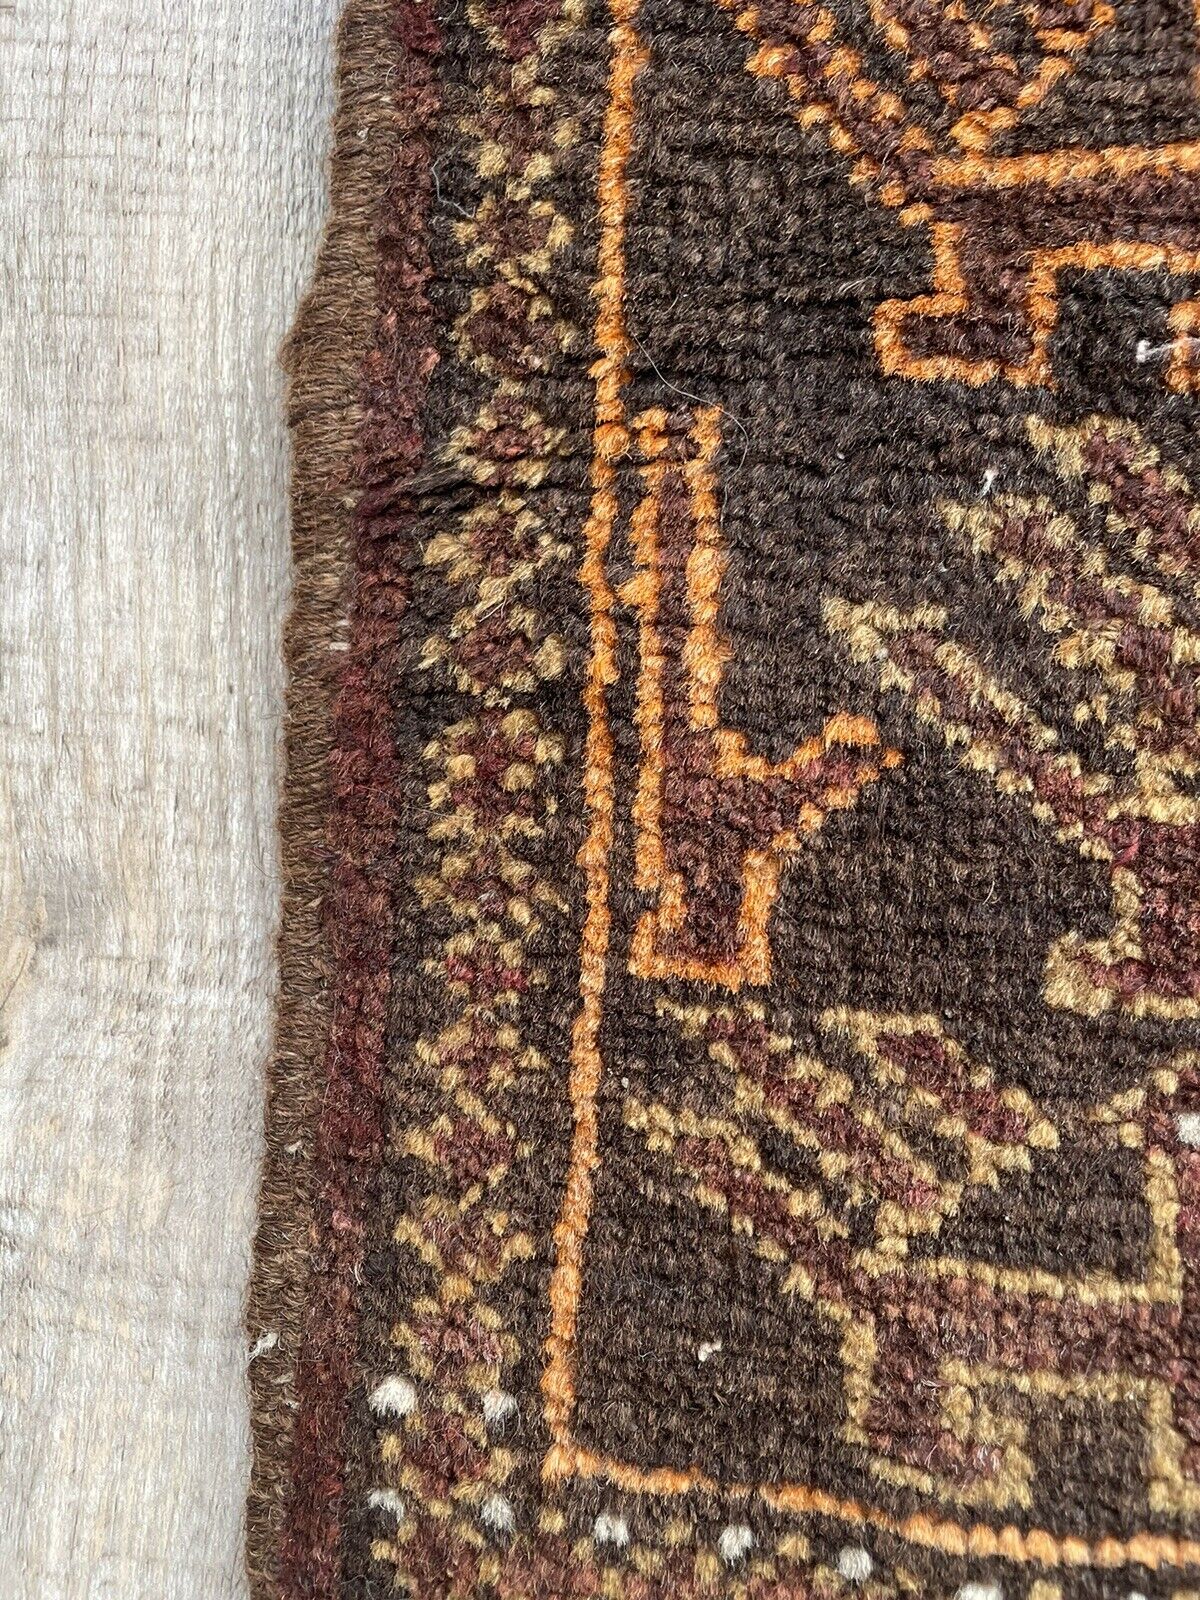 Close-up of craftsmanship on Handmade Vintage Afghan Baluch Collectible Rug - Detailed view highlighting the meticulous craftsmanship involved in creating the rug.